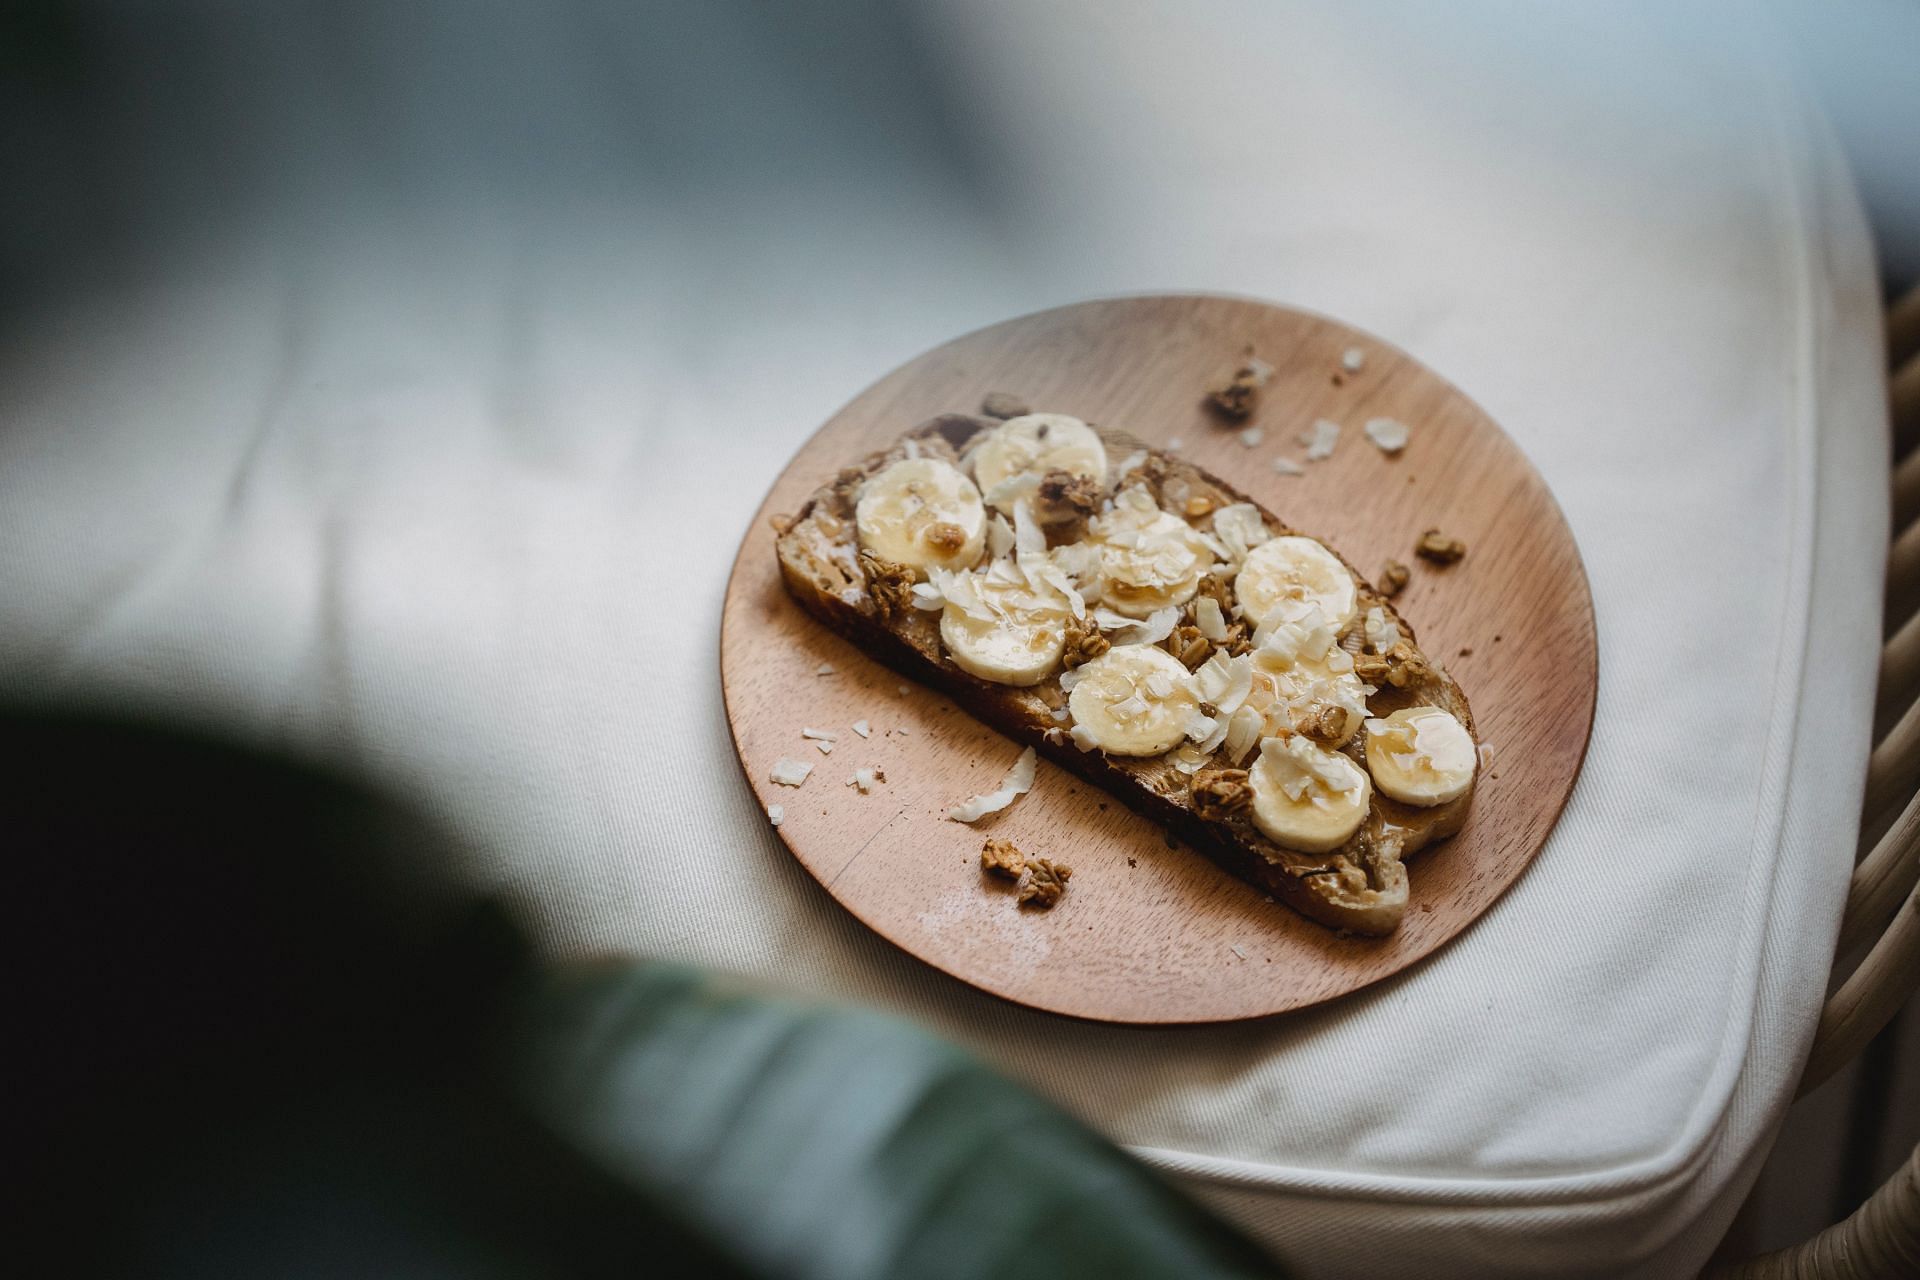 BRAT Diet can help you to improve your digestion. (Image via Pexels / Nicola Barts)